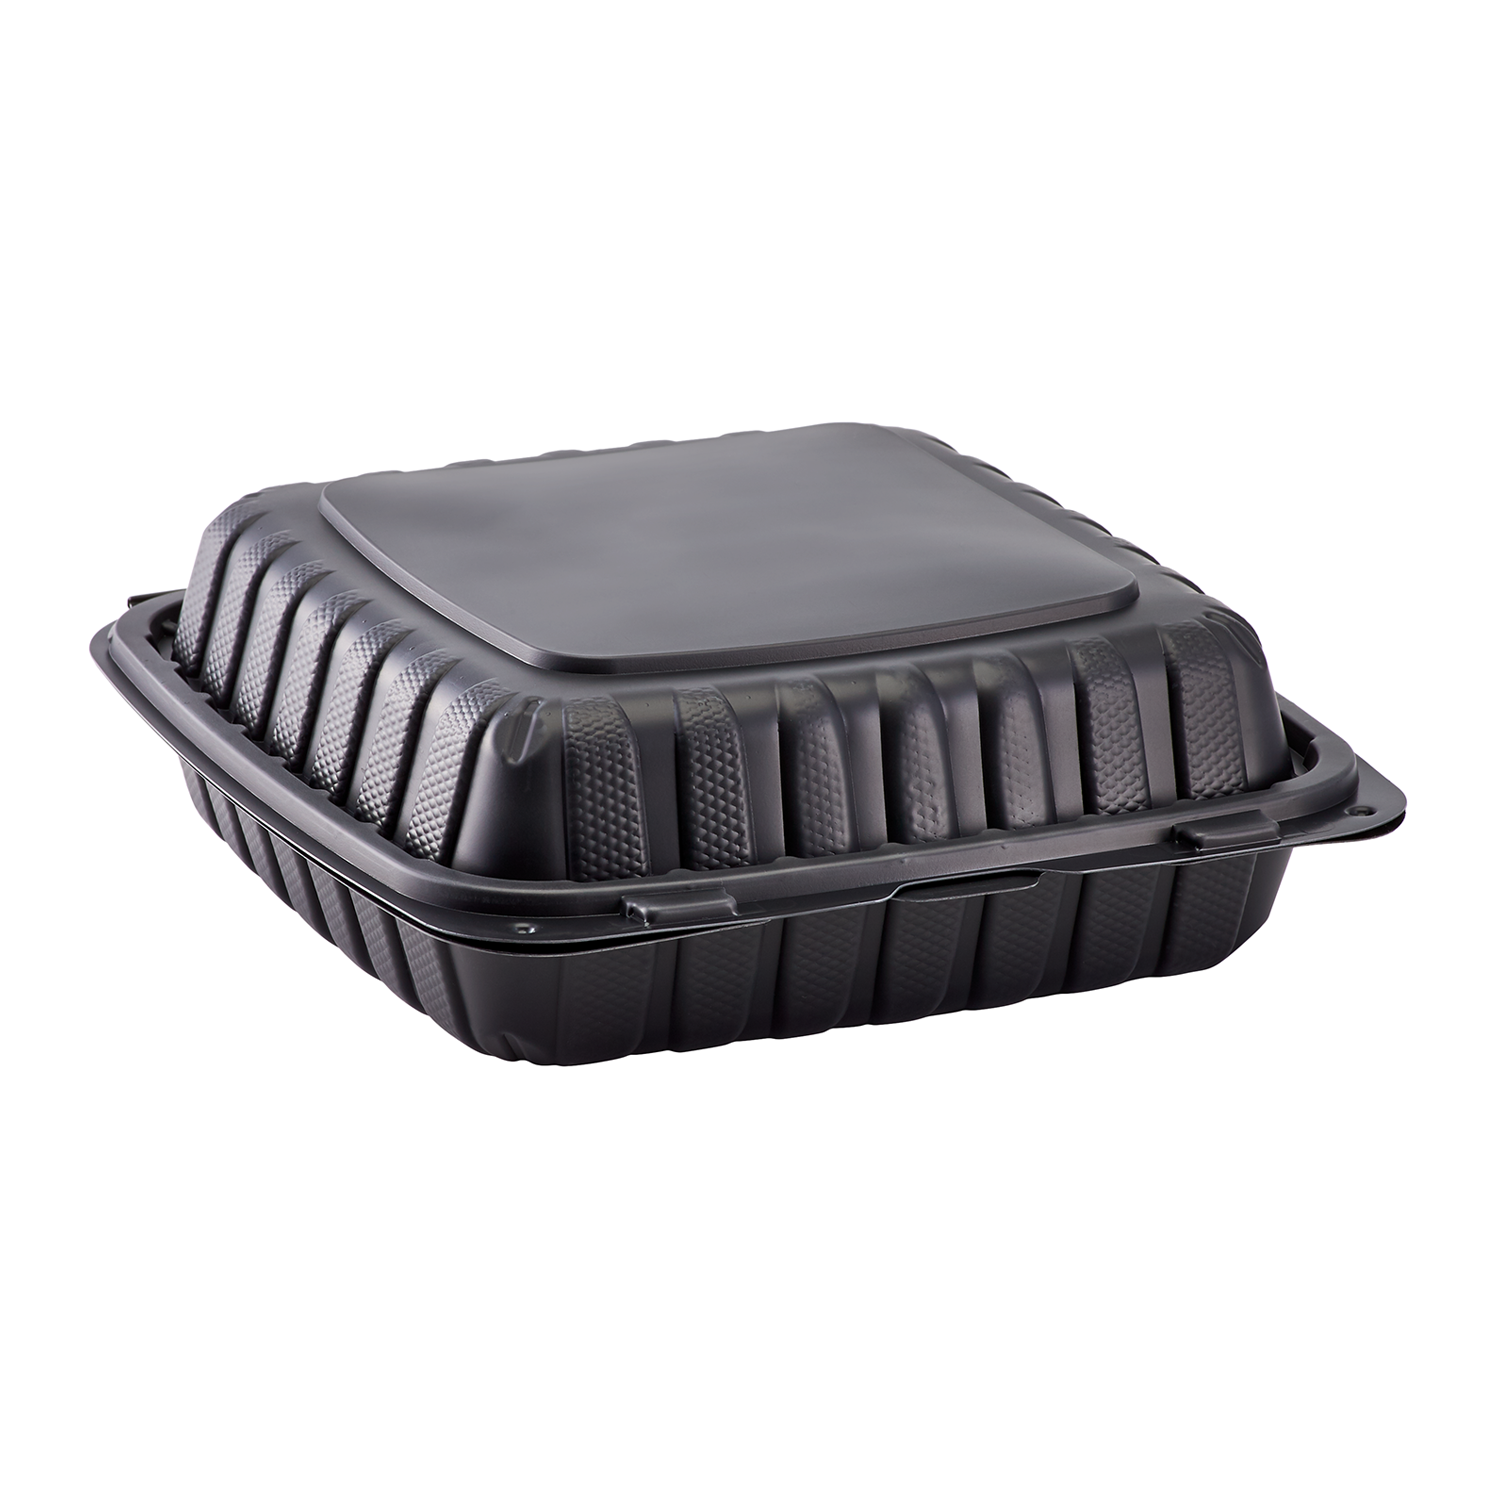 Avant Grub Durable 6x9 Take Out Food Containers with Clamshell Hinged Lid  100 Pack. Microwaveable, Disposable Takeout Box to Carry Meals ToGo. Great